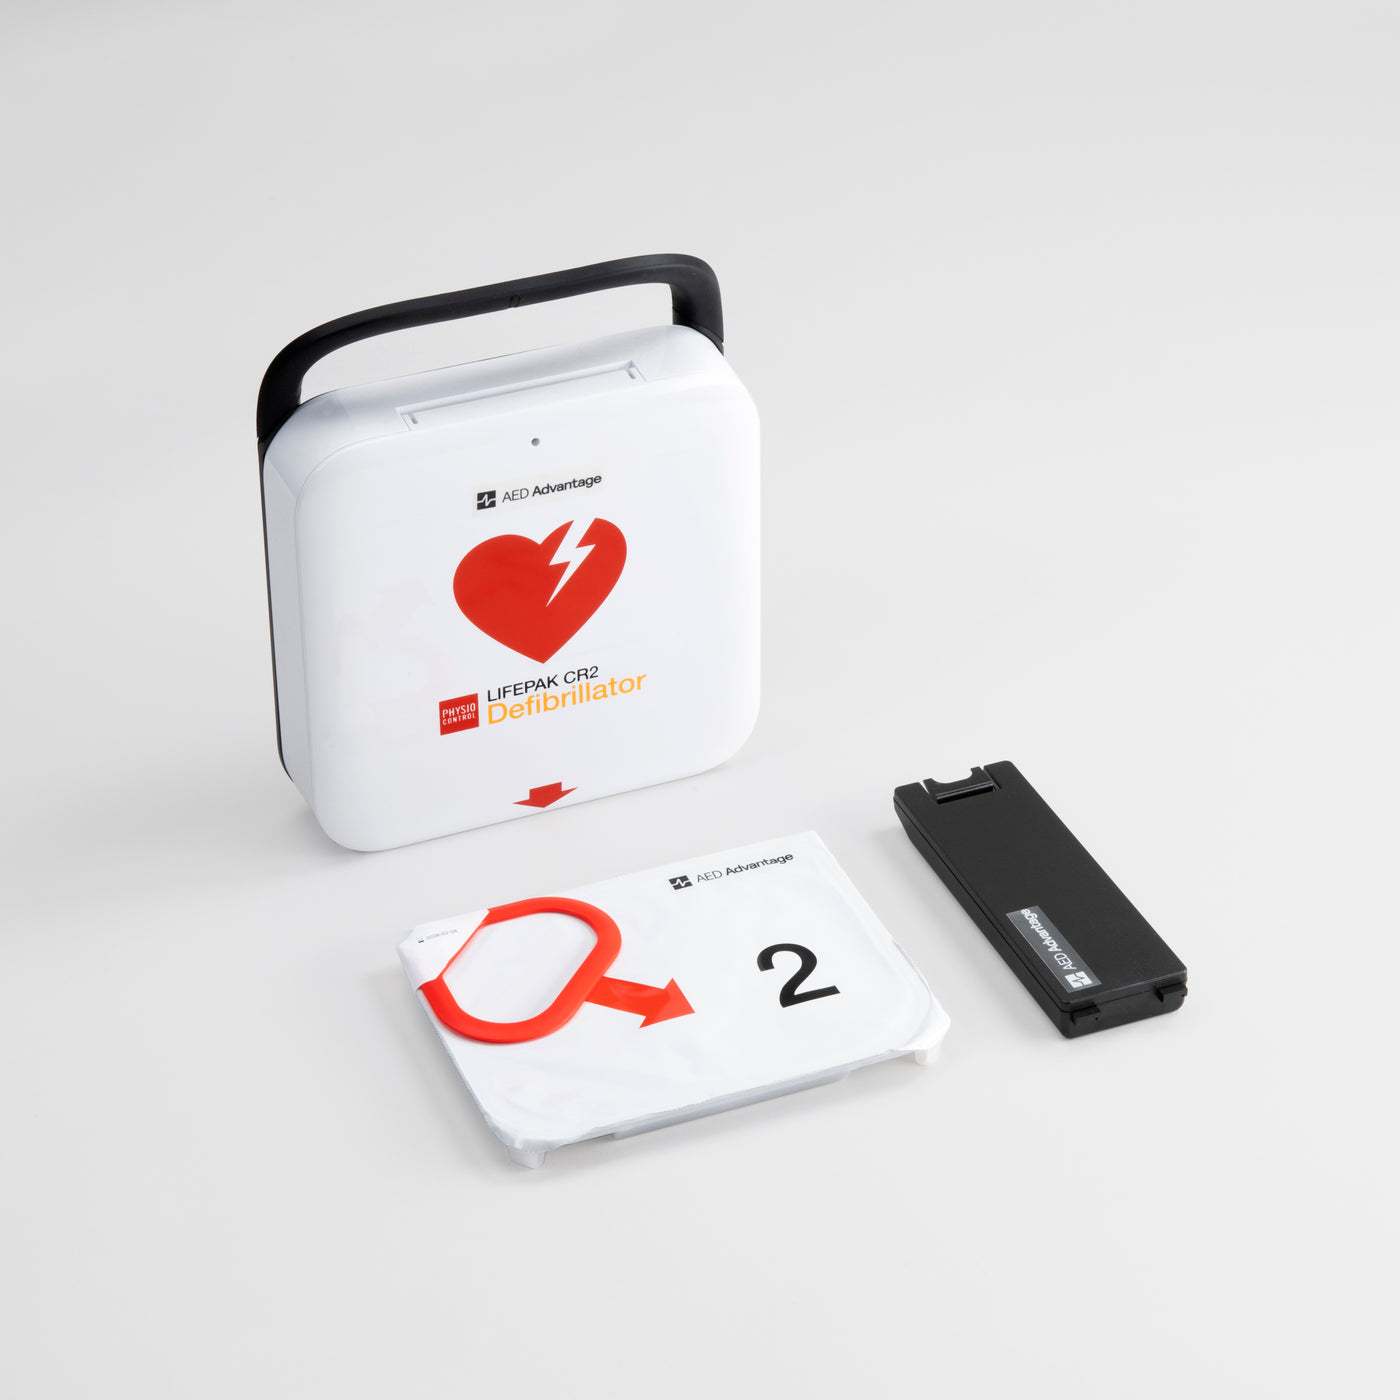 A white and red LIFEPAK CR2 AED with its electrode pad and battery